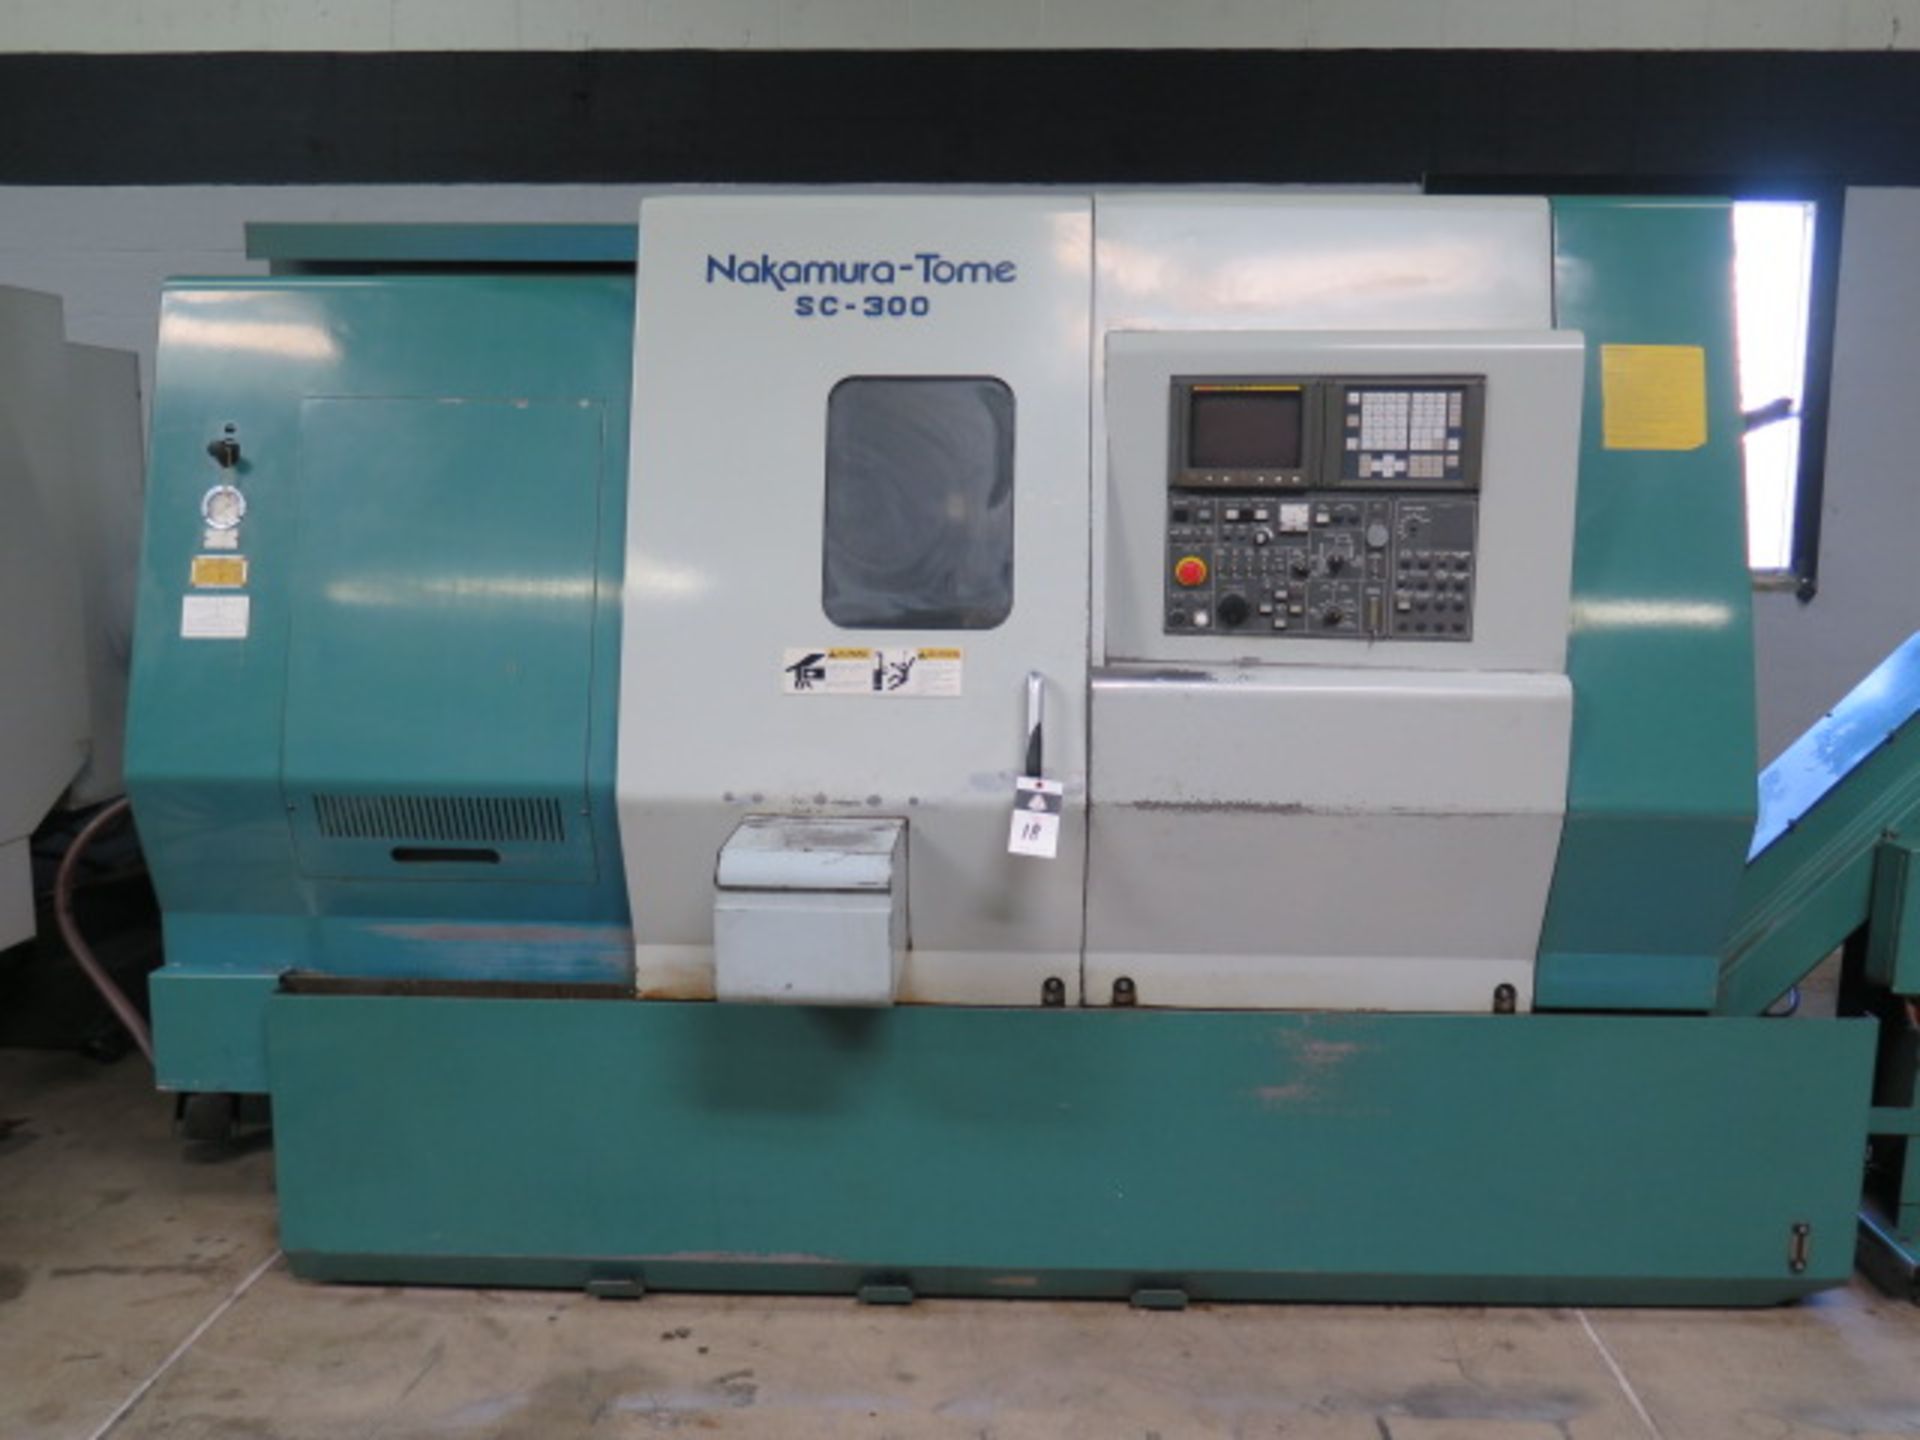 Nakamura-Tome SC-300 CNC Turning Center s/n S303902 w/ Fanuc Series 21-T Controls, SOLD AS IS